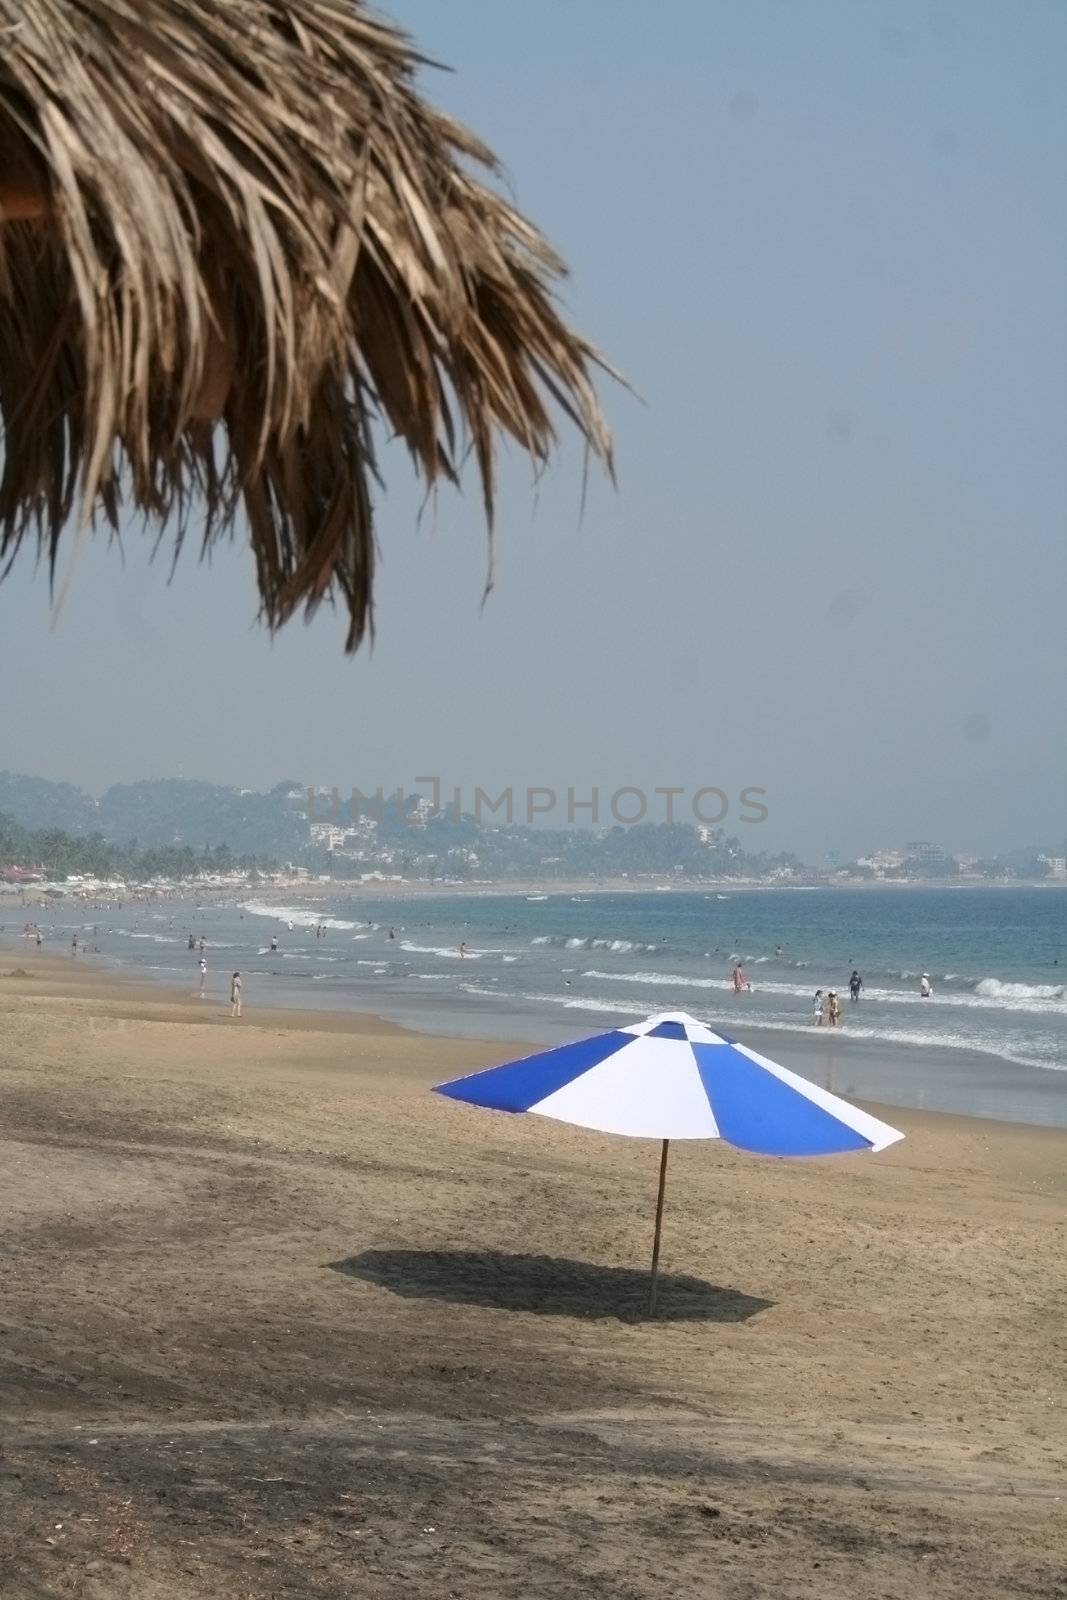 umbrella and chairs on beach